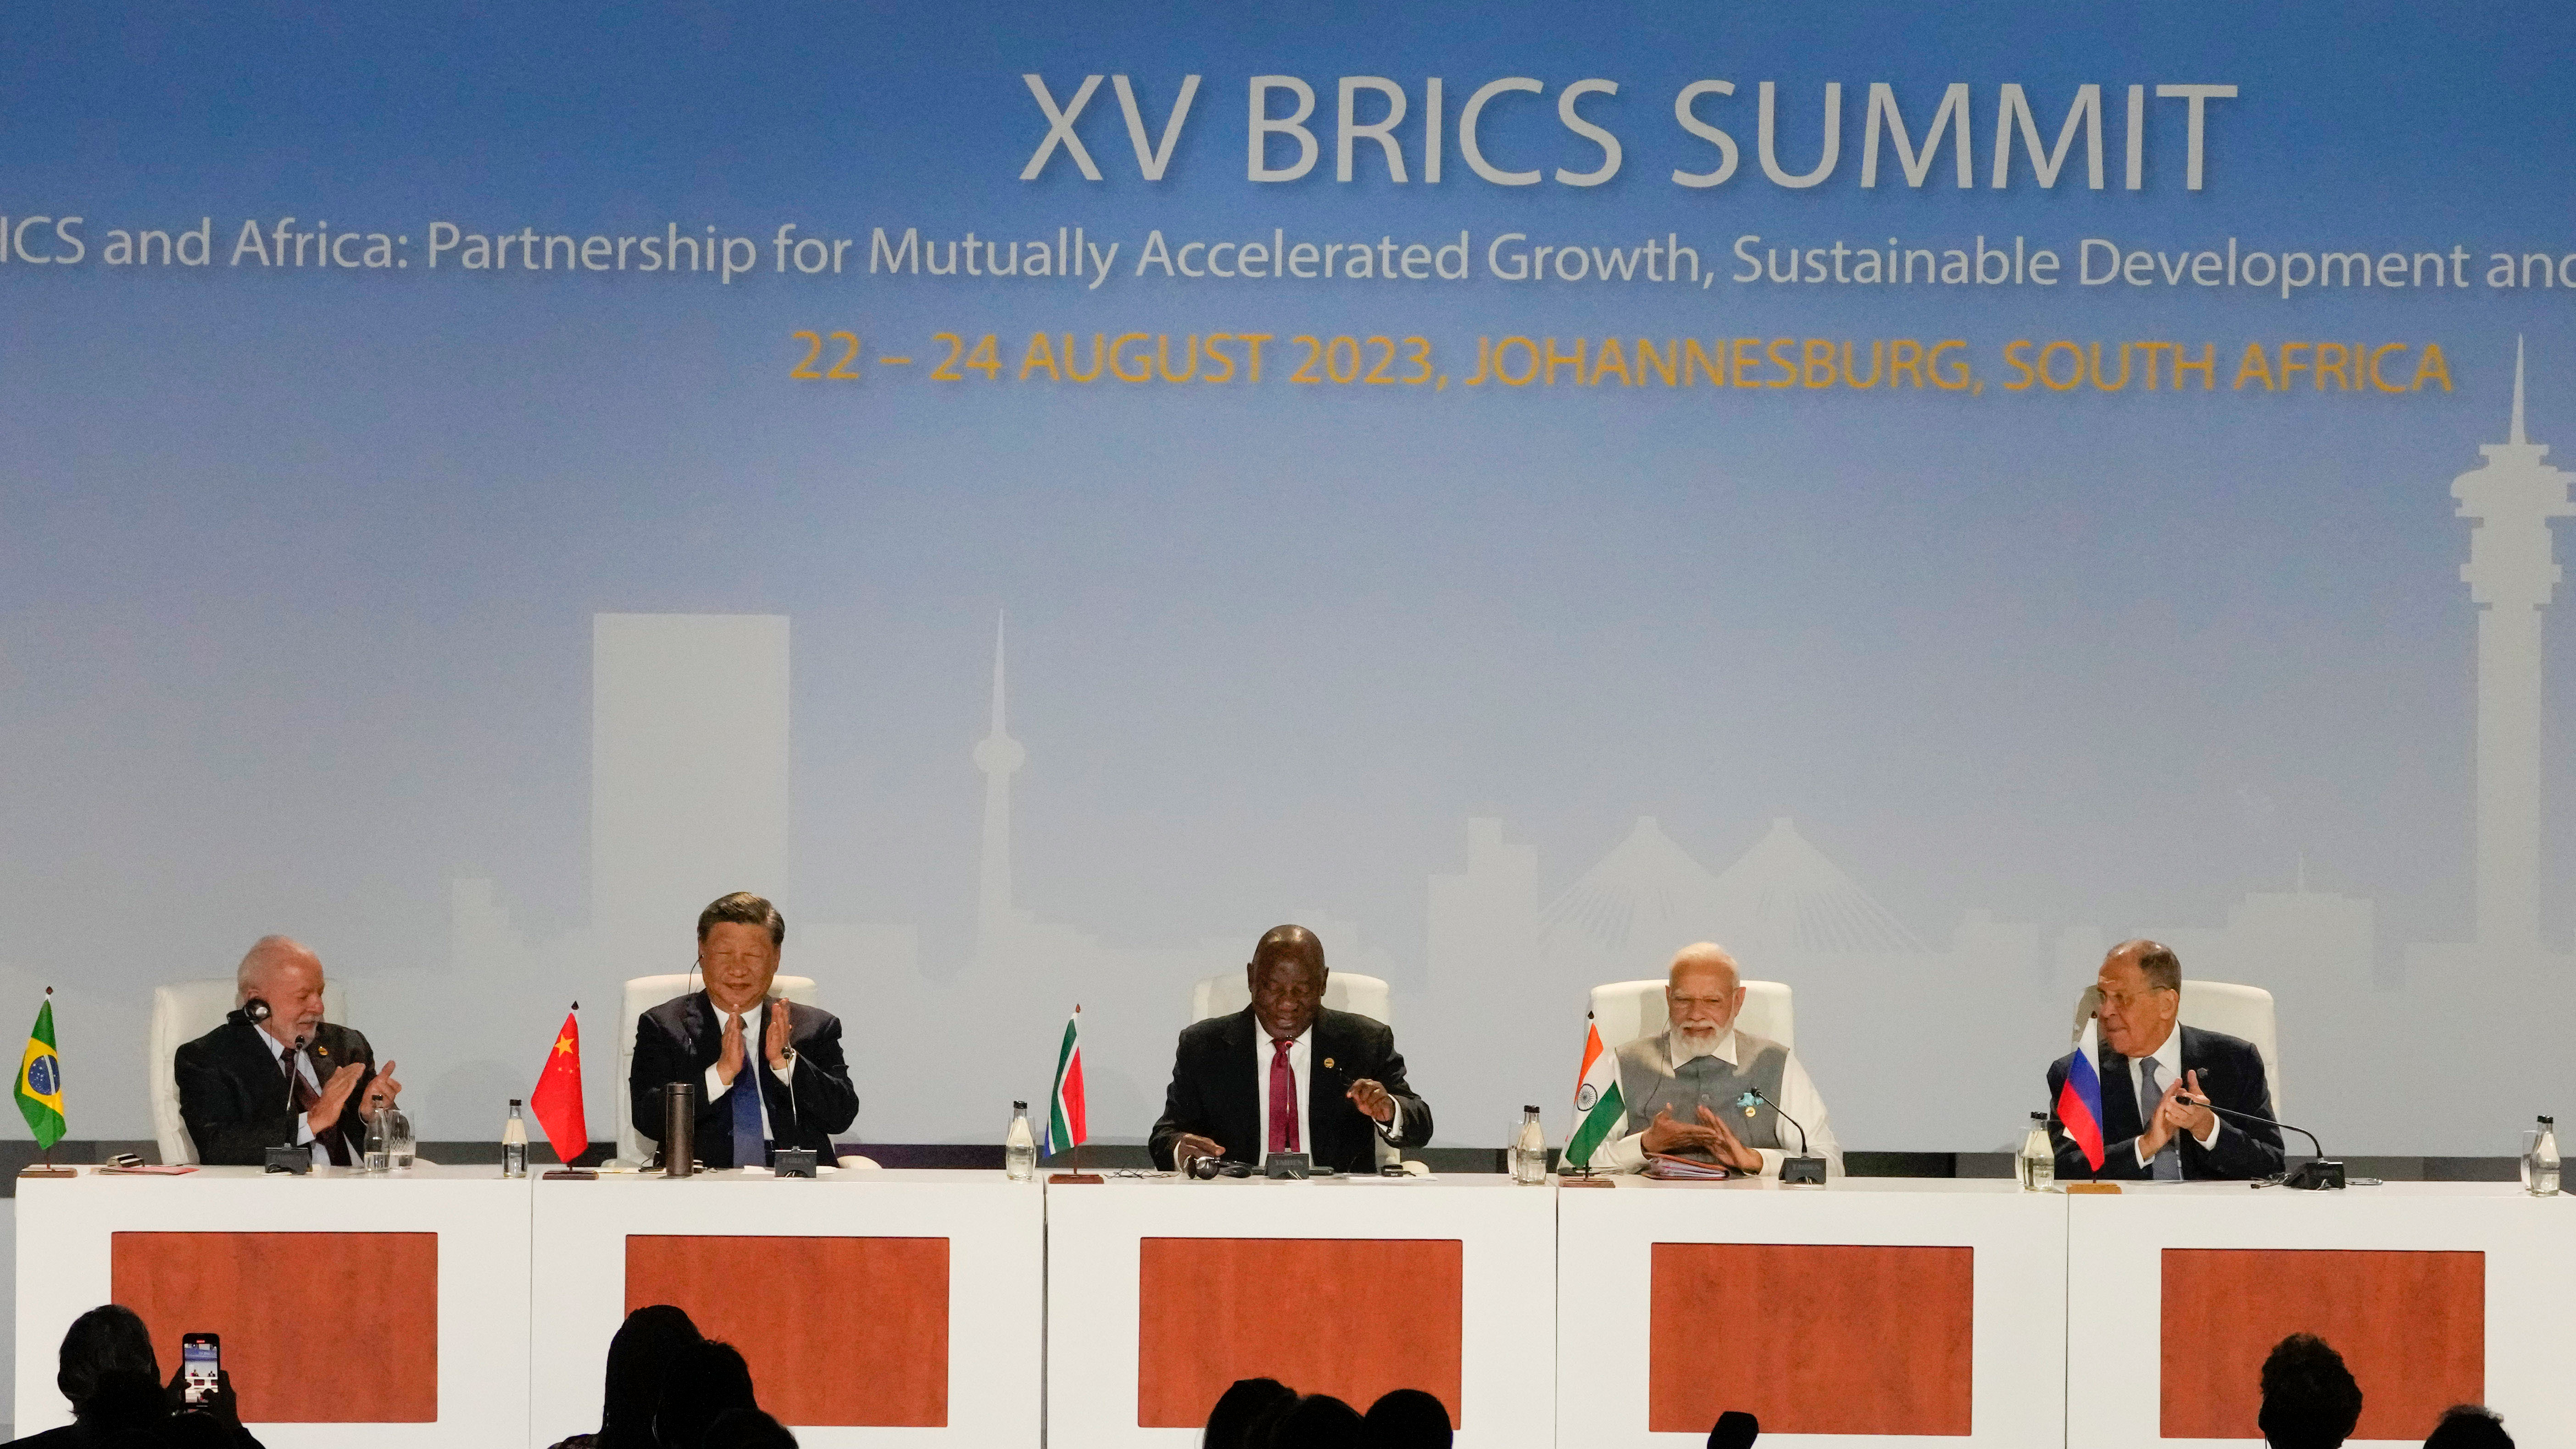 South African President Cyril Ramaphosa, center, delivers the XV BRICS Summit declaration, flanked by, from left, President of Brazil Luiz Inacio Lula da Silva, President of China Xi Jinping, Prime Minister of India Narendra Modi and Russia's Foreign Minister Sergei Lavrov, in Johannesburg, South Africa, Thursday, Aug. 24, 2023. /AP